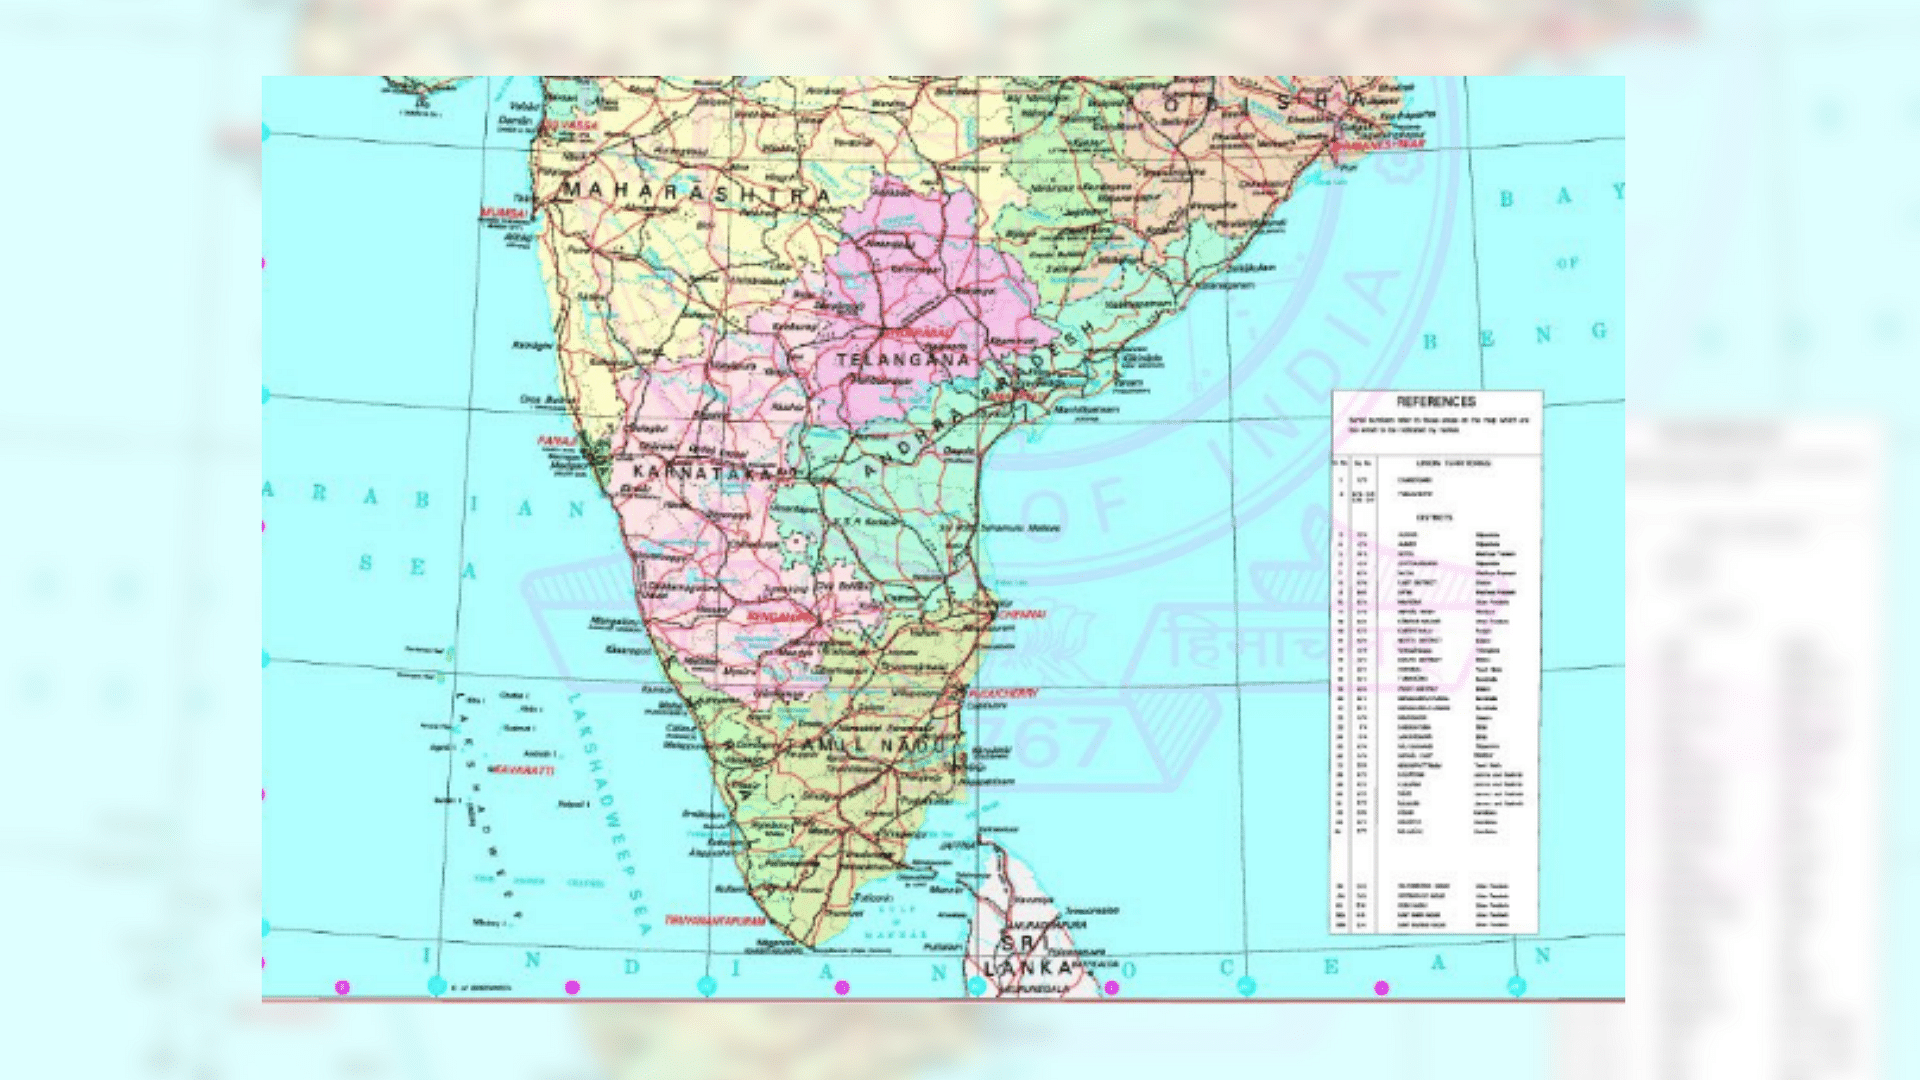 Amaravati had been missing from the previous map released by the Centre, triggering a major row in the state.